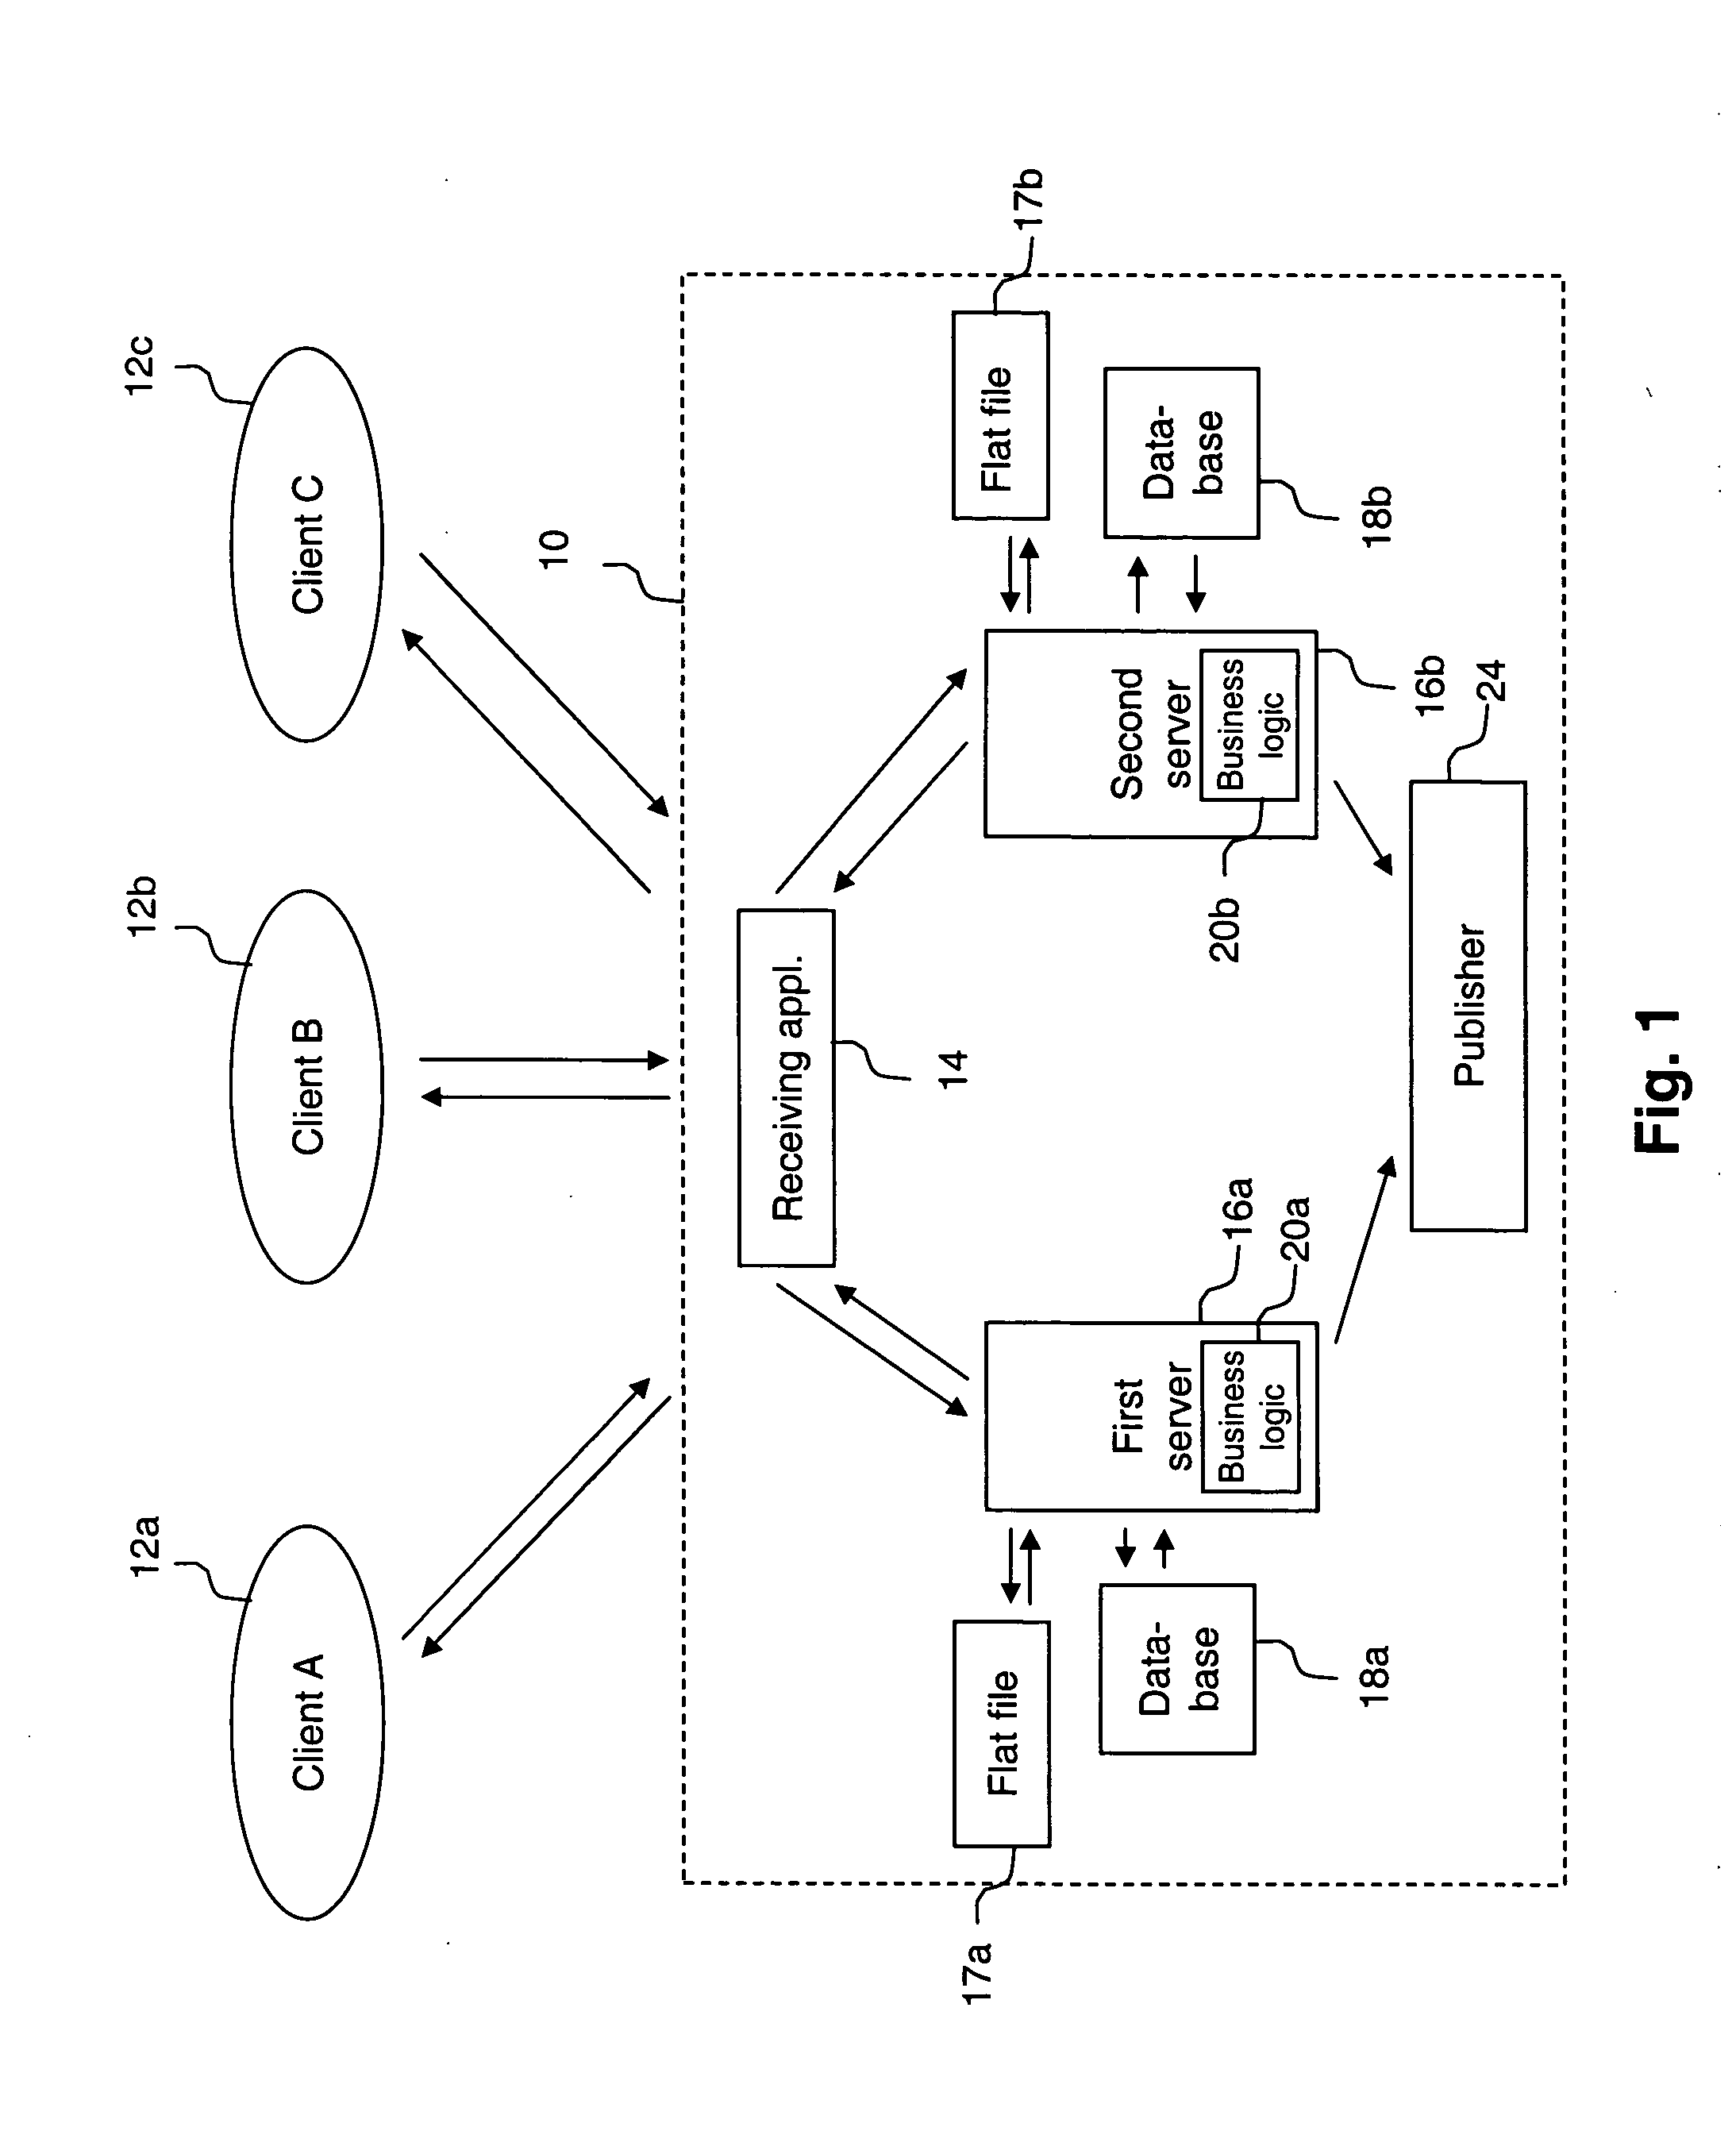 Method for enhancing the operation of a database